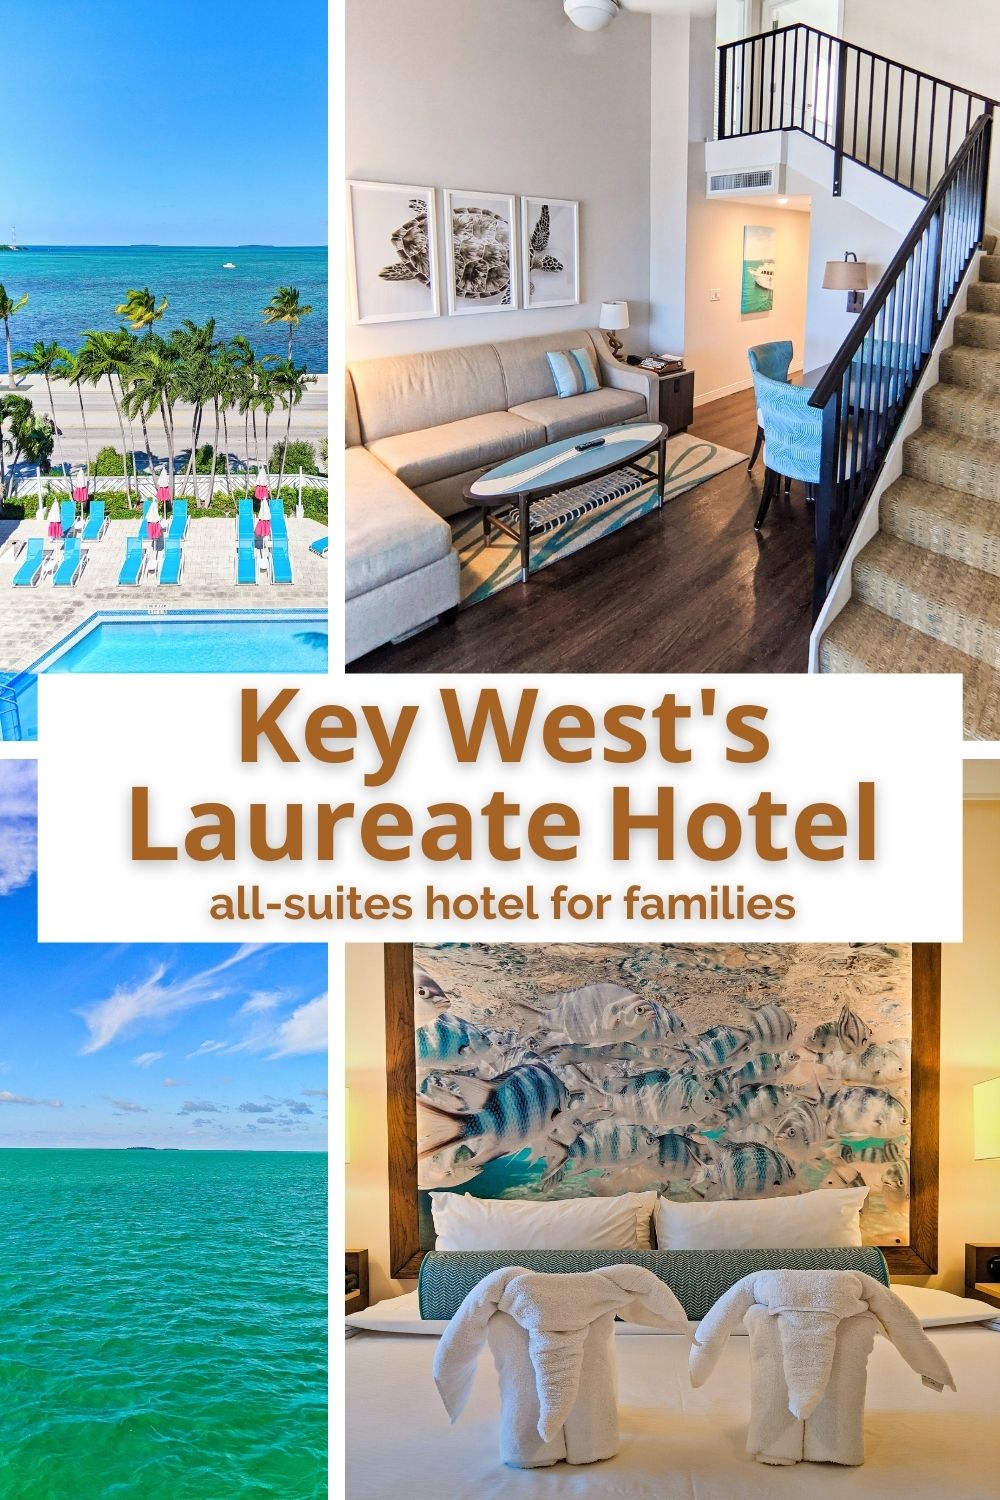 Review of the Laureate Key West, an all-suites hotel. In a great location that's NOT downtown, the Laureate is perfect for families with plenty of space and hotel amenities, directly across from the turquoise waters of the Florida Keys.